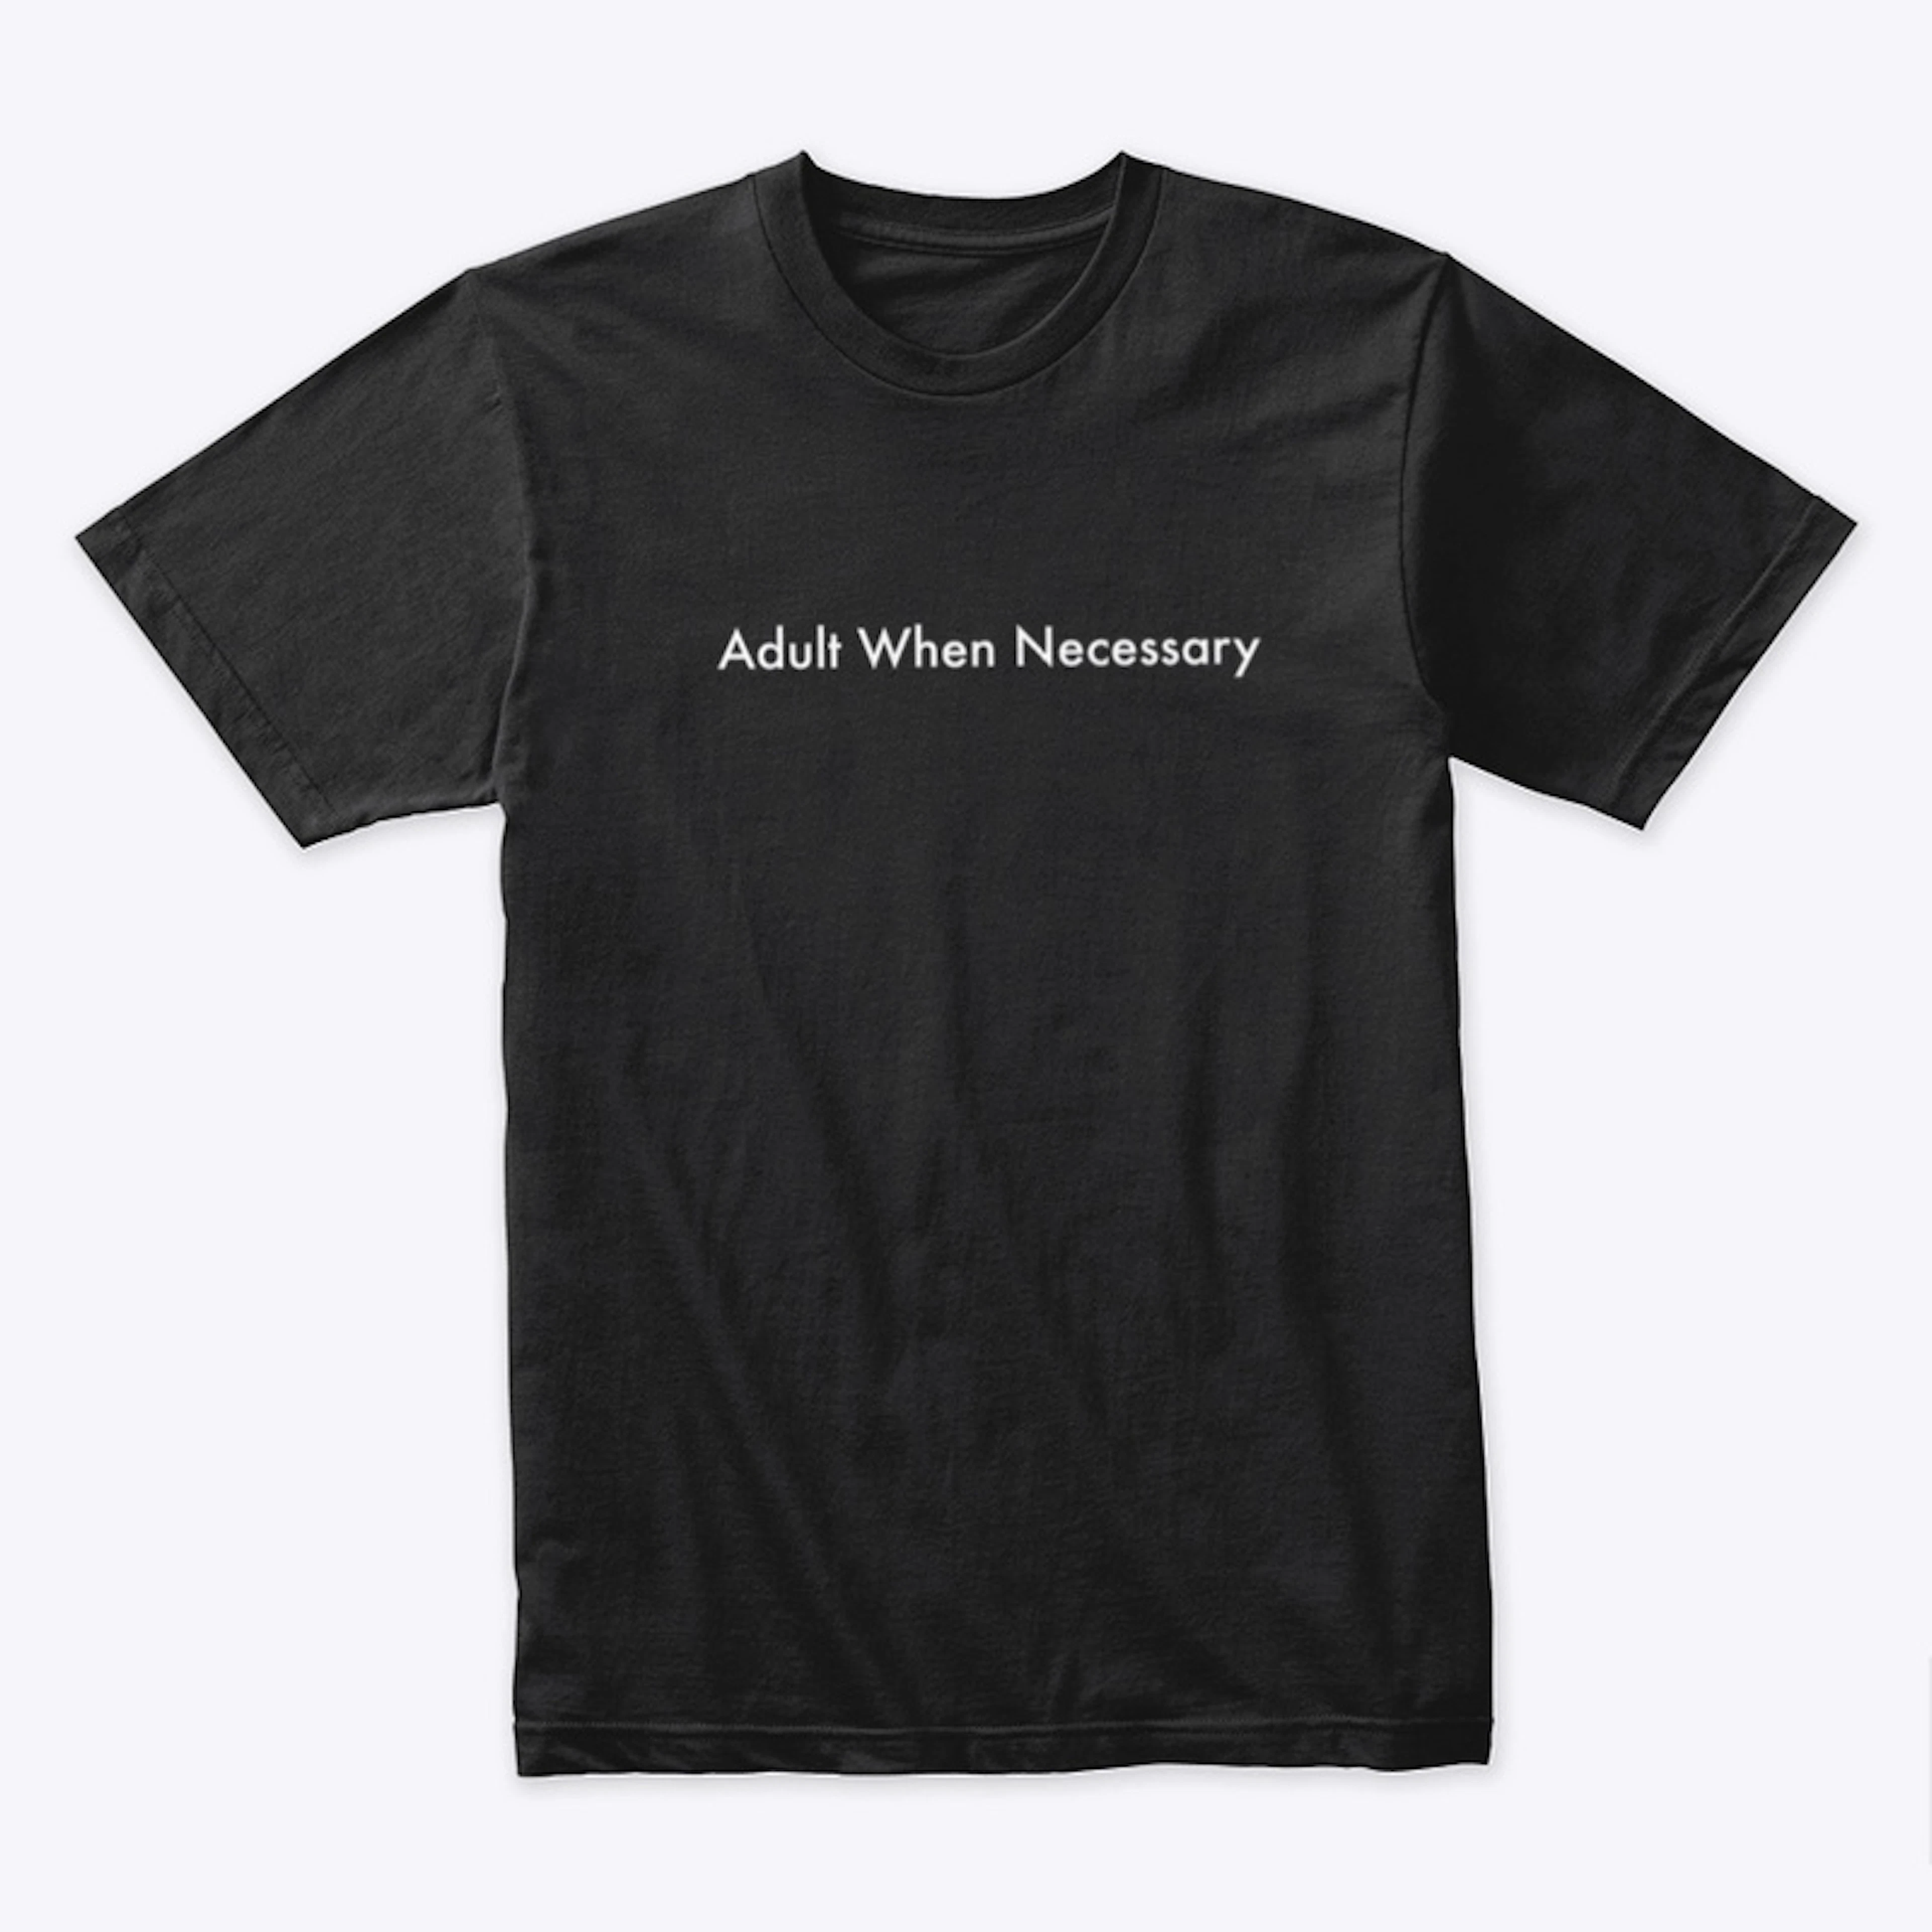 Adult When Necessary 